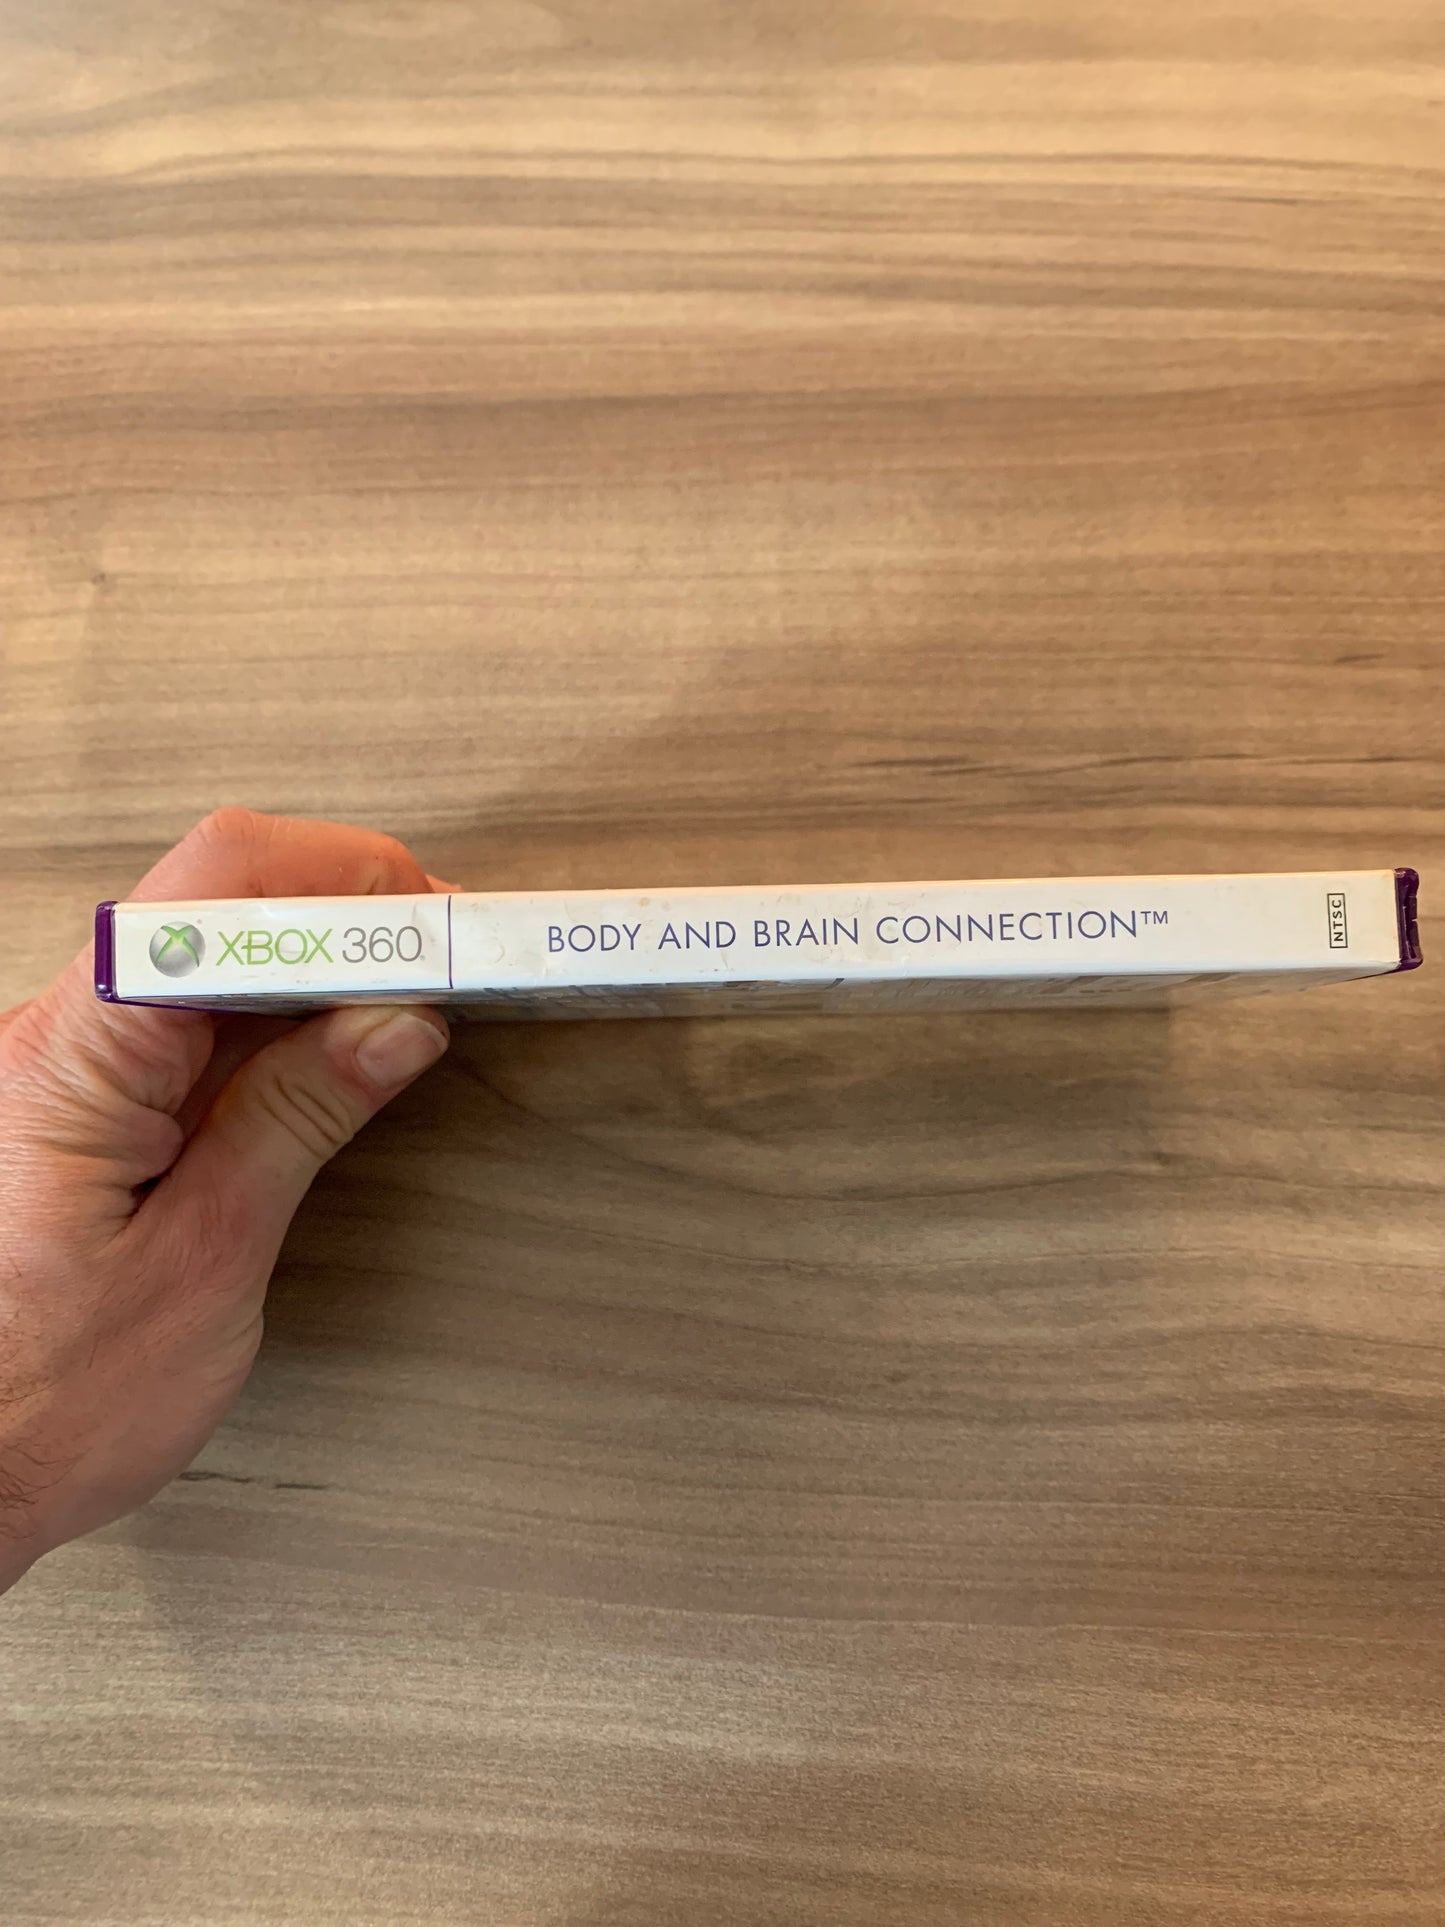 MiCROSOFT XBOX 360 | BODY AND BRAiN CONNECTiON